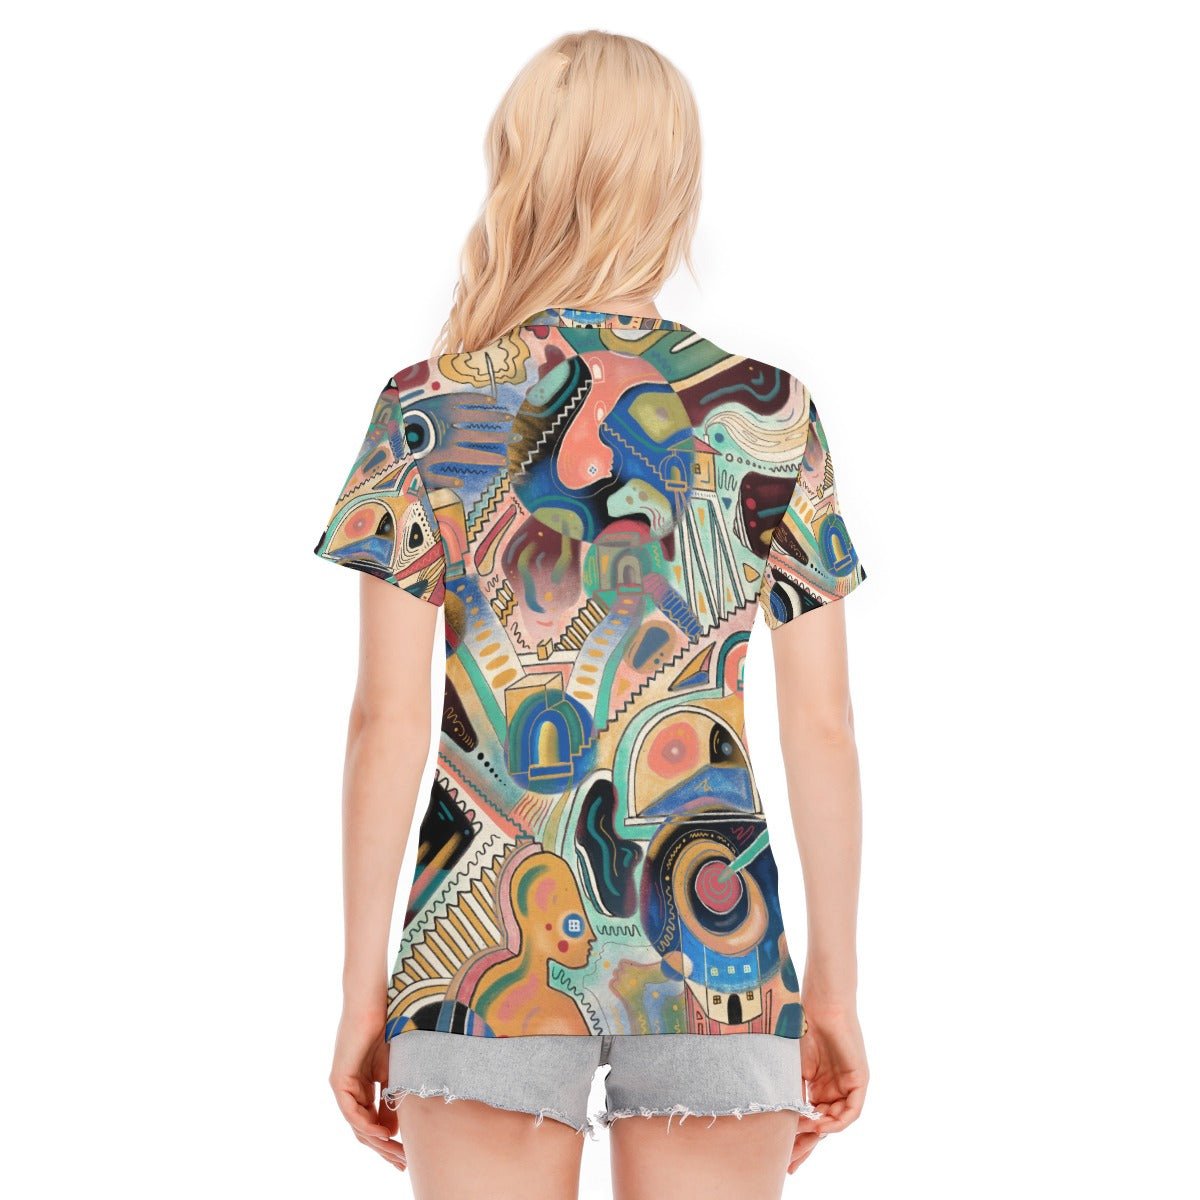 "Candid Cacophony" - Women's T-Shirt | T-Shirts | All Around Artsy Fashion